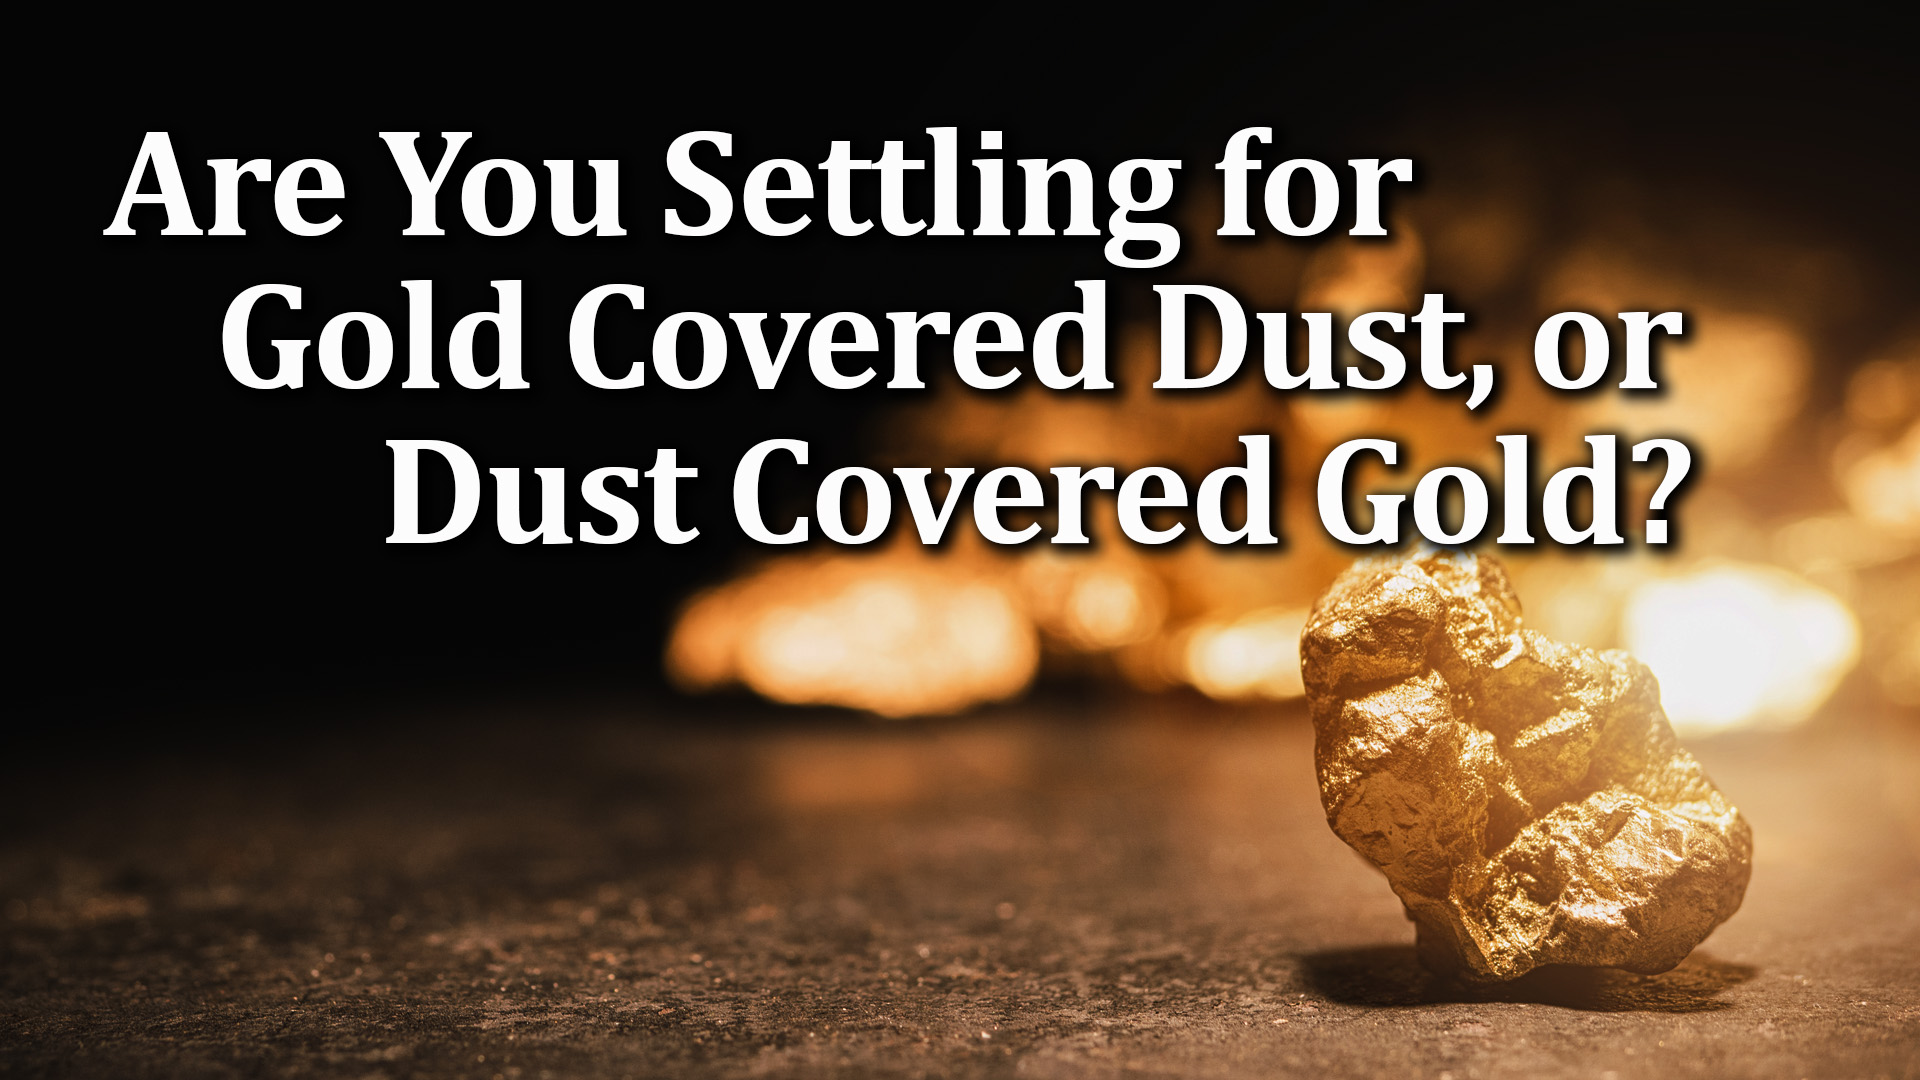 11-16-21 Gold Covered Dust or Dust Covered Gold